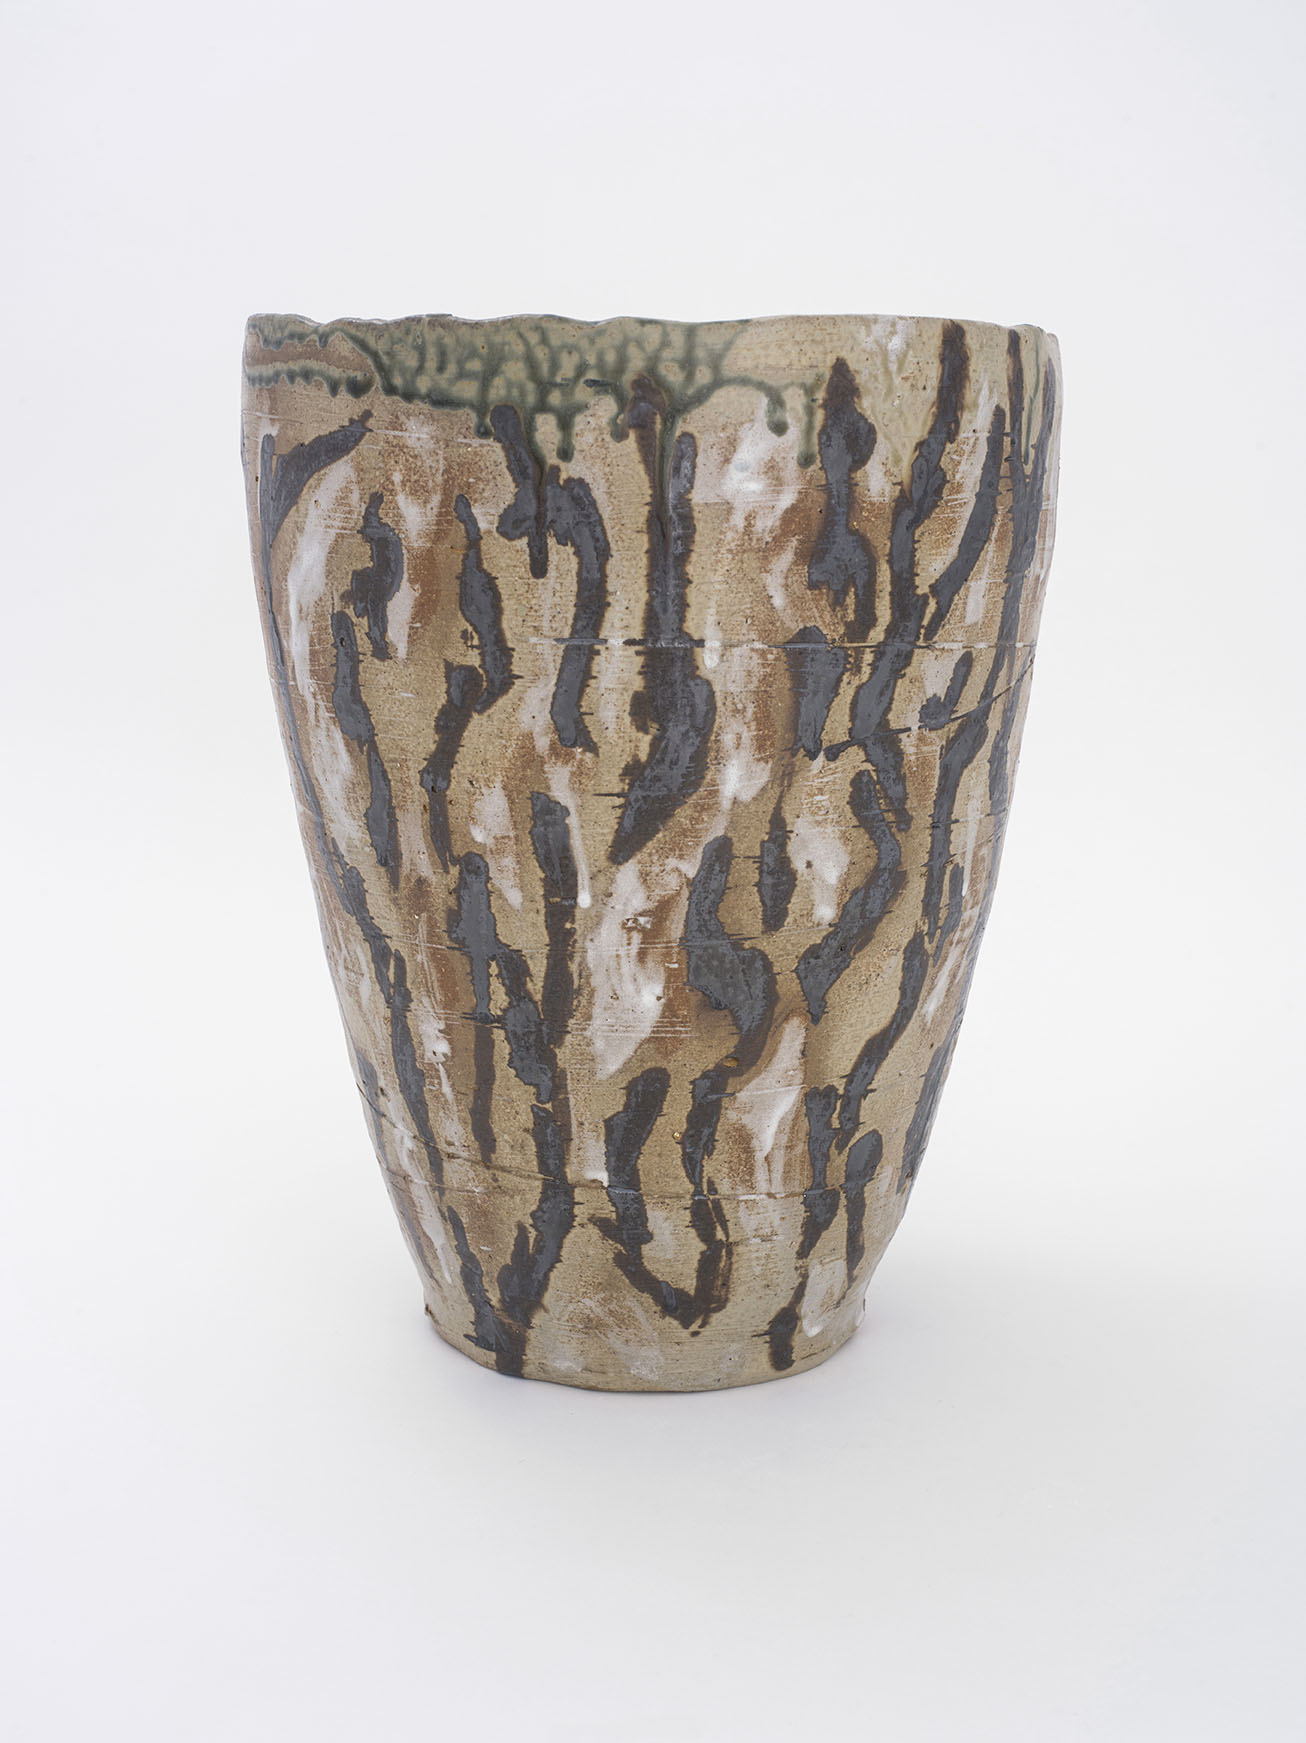 Tall stoneware pot with brown glazes applied in abstract brushtrokes